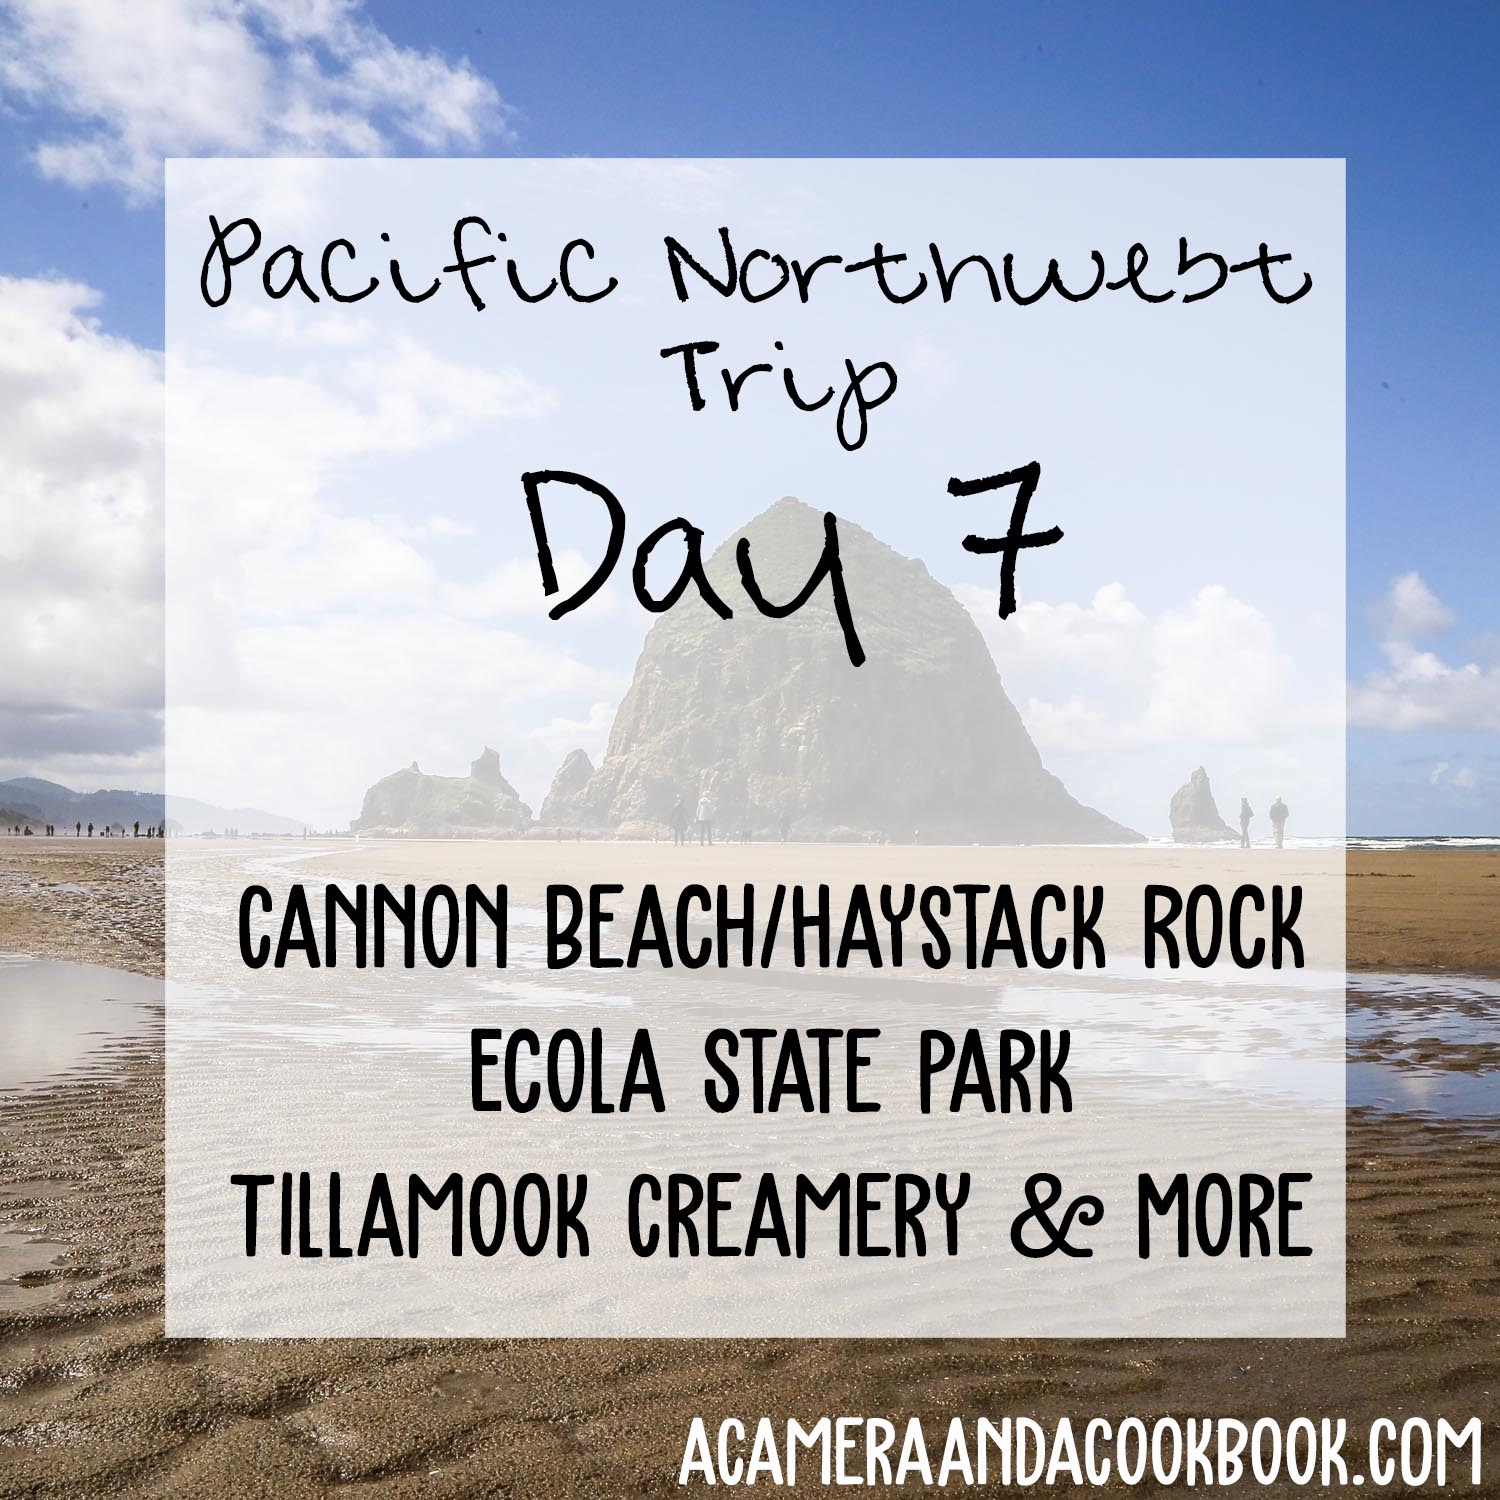 Pacific NW Trip: Day 7